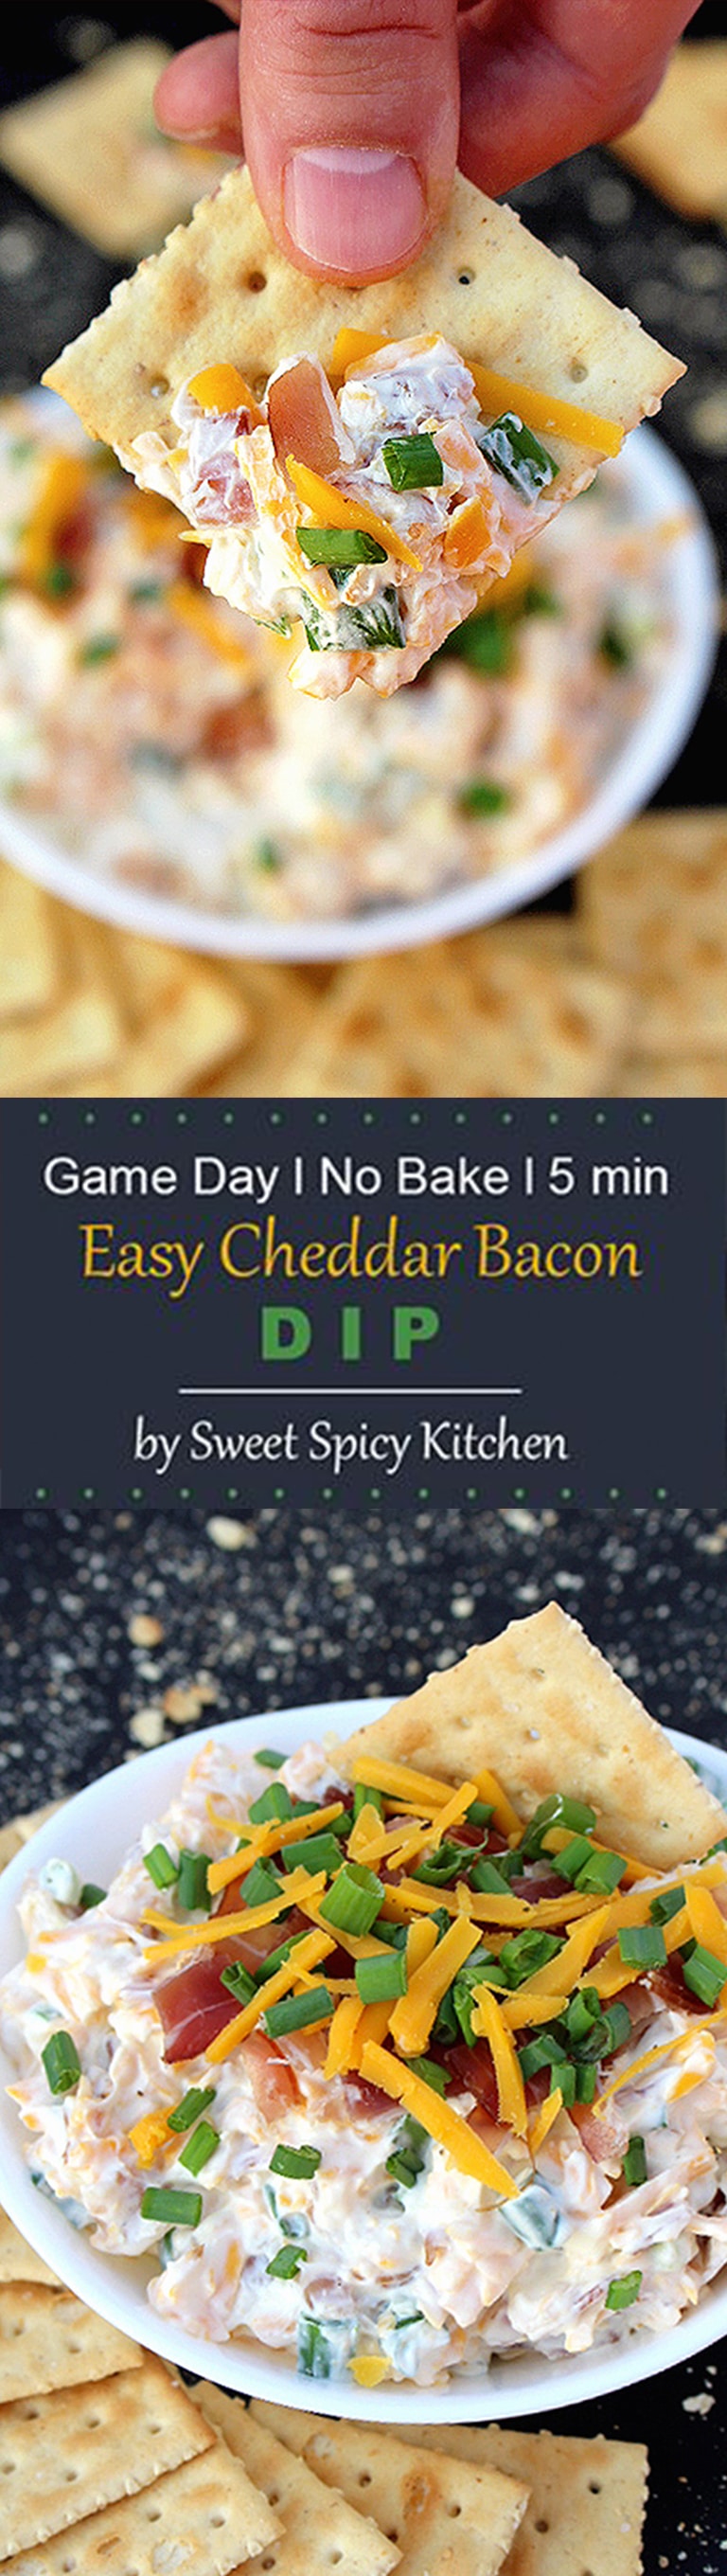 Our favorite appetizer for the Game Day is a dip that takes only 5 minutes to prepare – No Bake Cheddar Bacon Dip